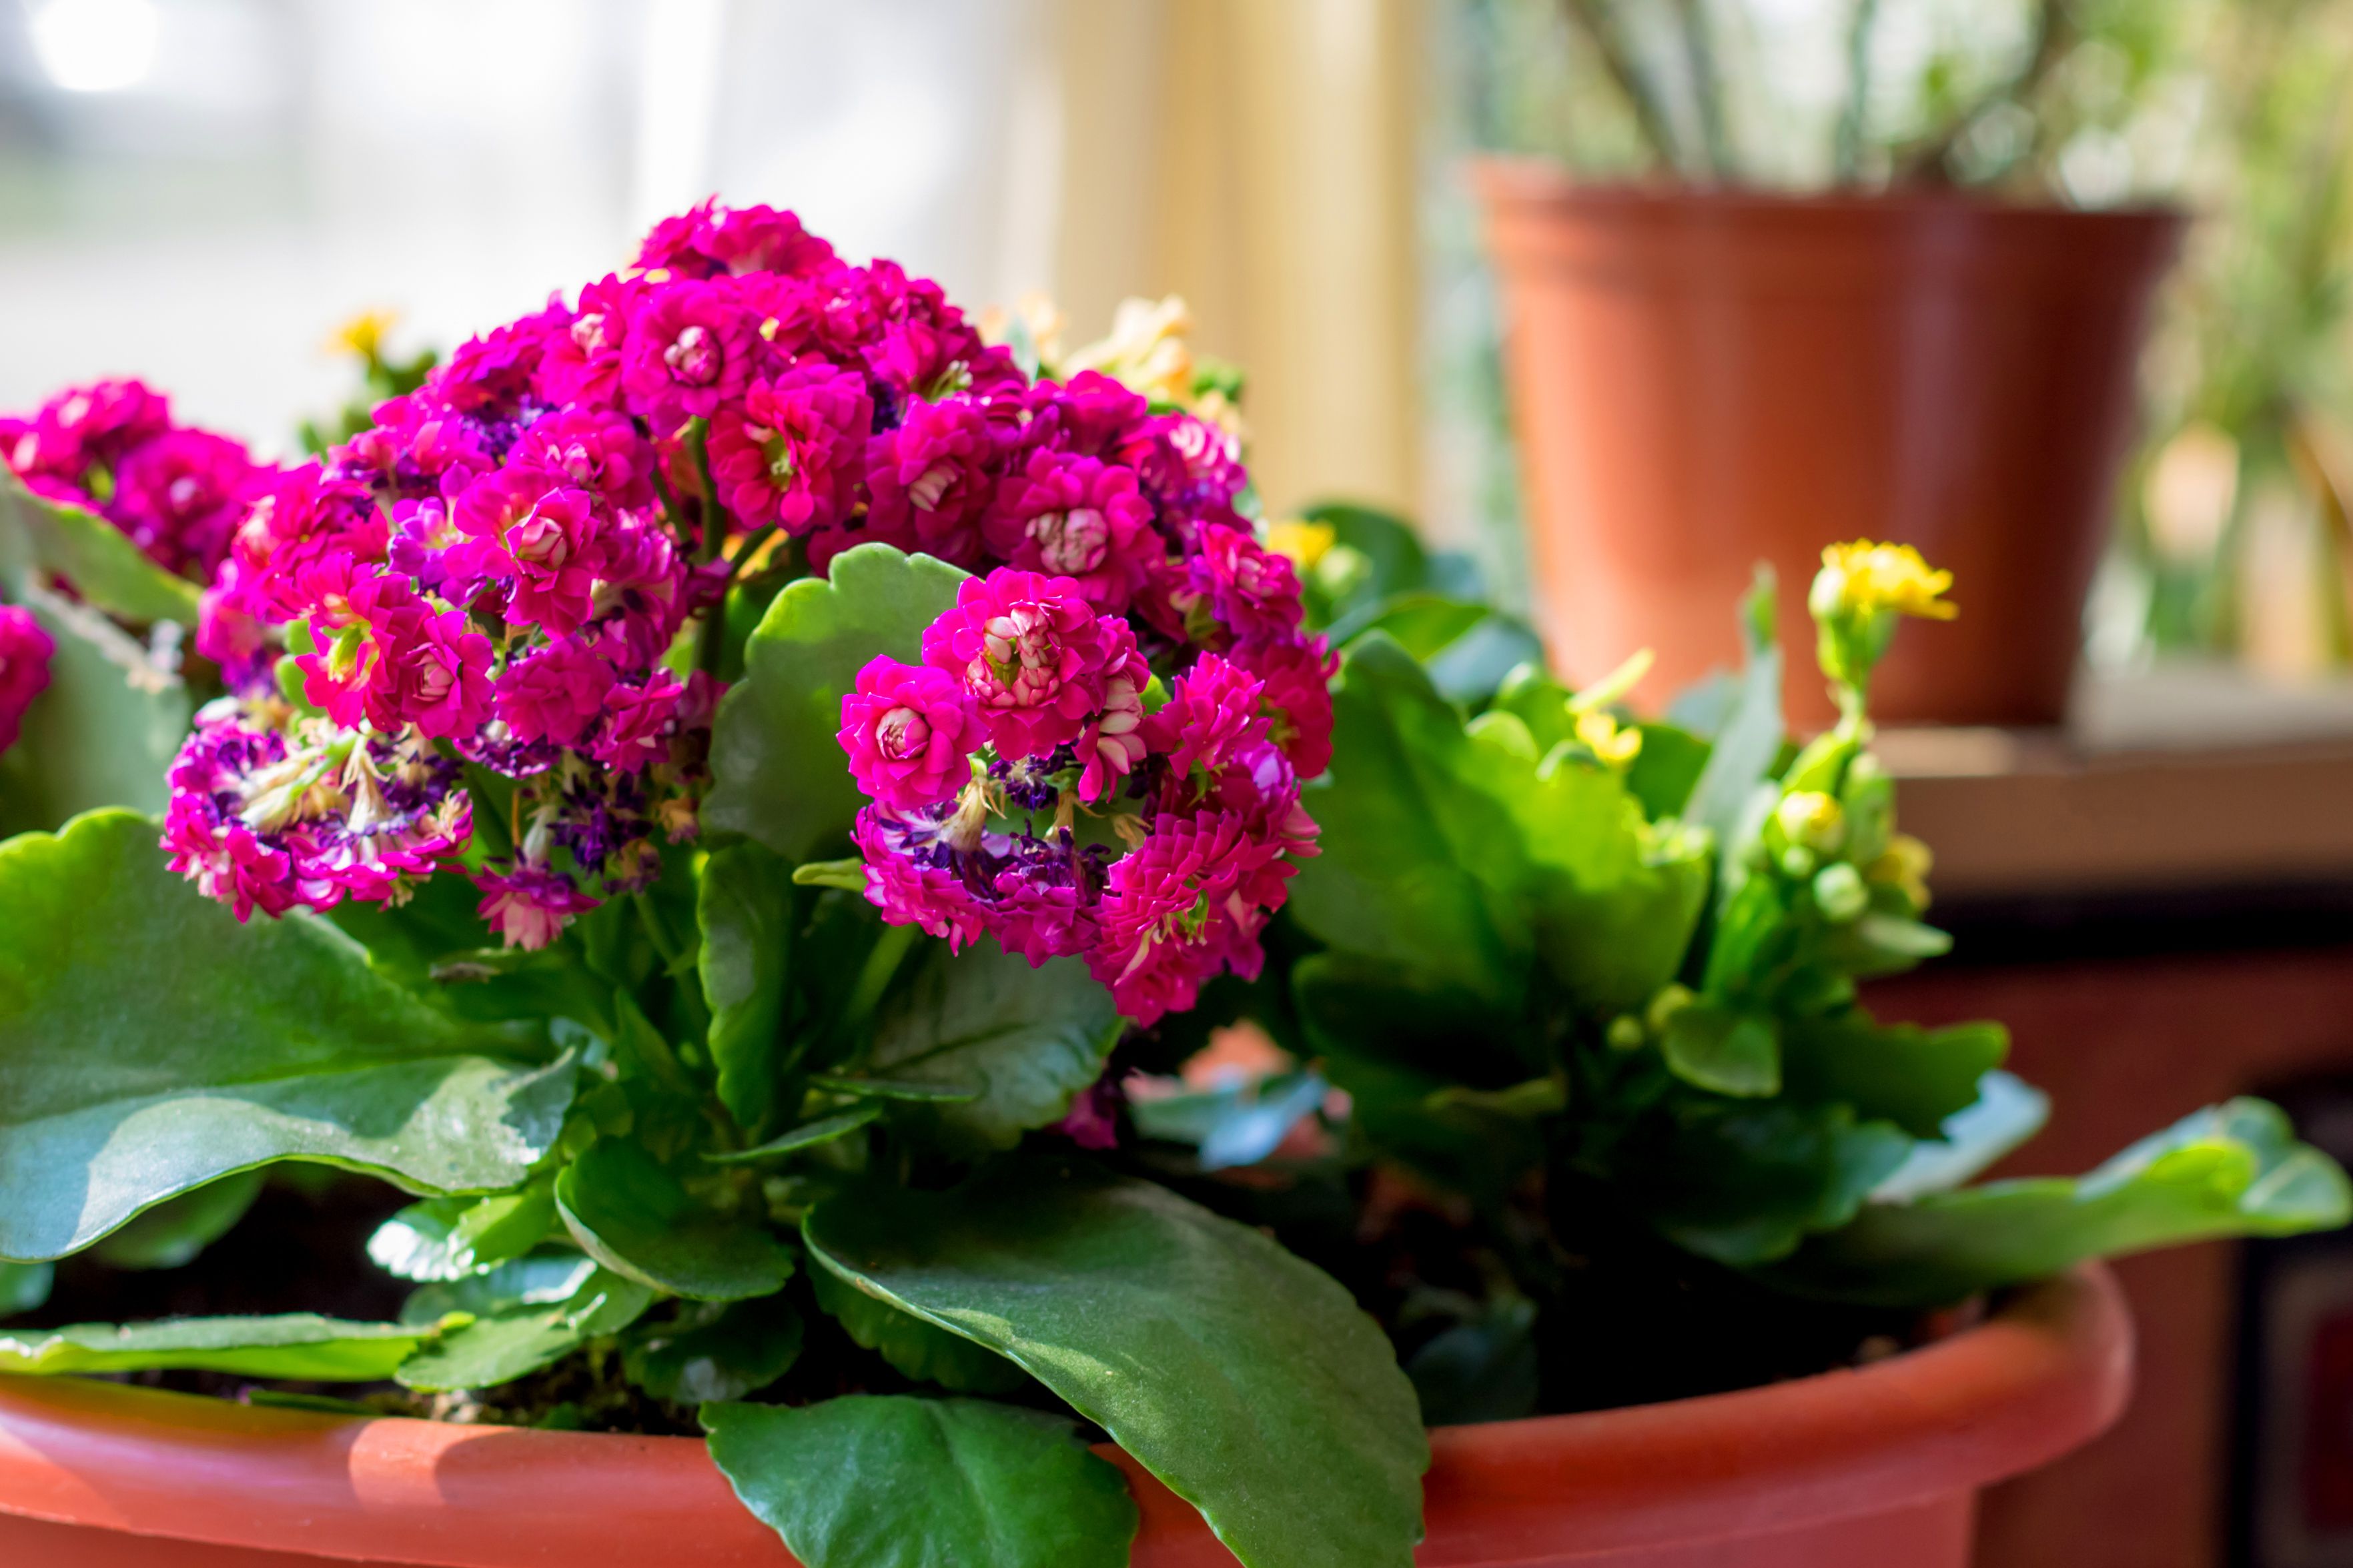 12 Popular Plants That Could Kill Your Pets